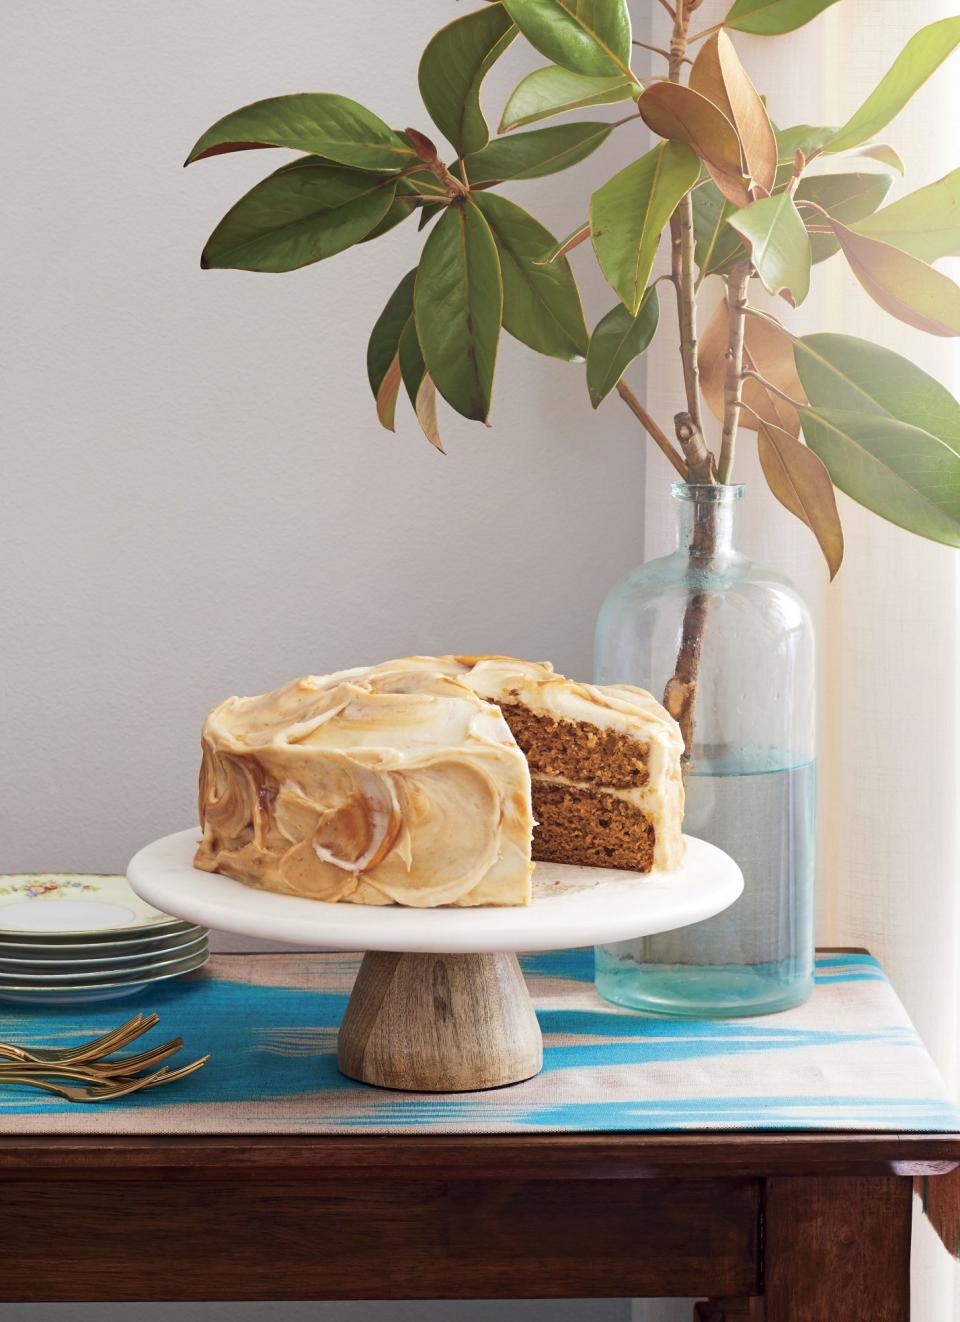 Pumpkin Layer Cake Recipe with Caramel-Cream Cheese Frosting